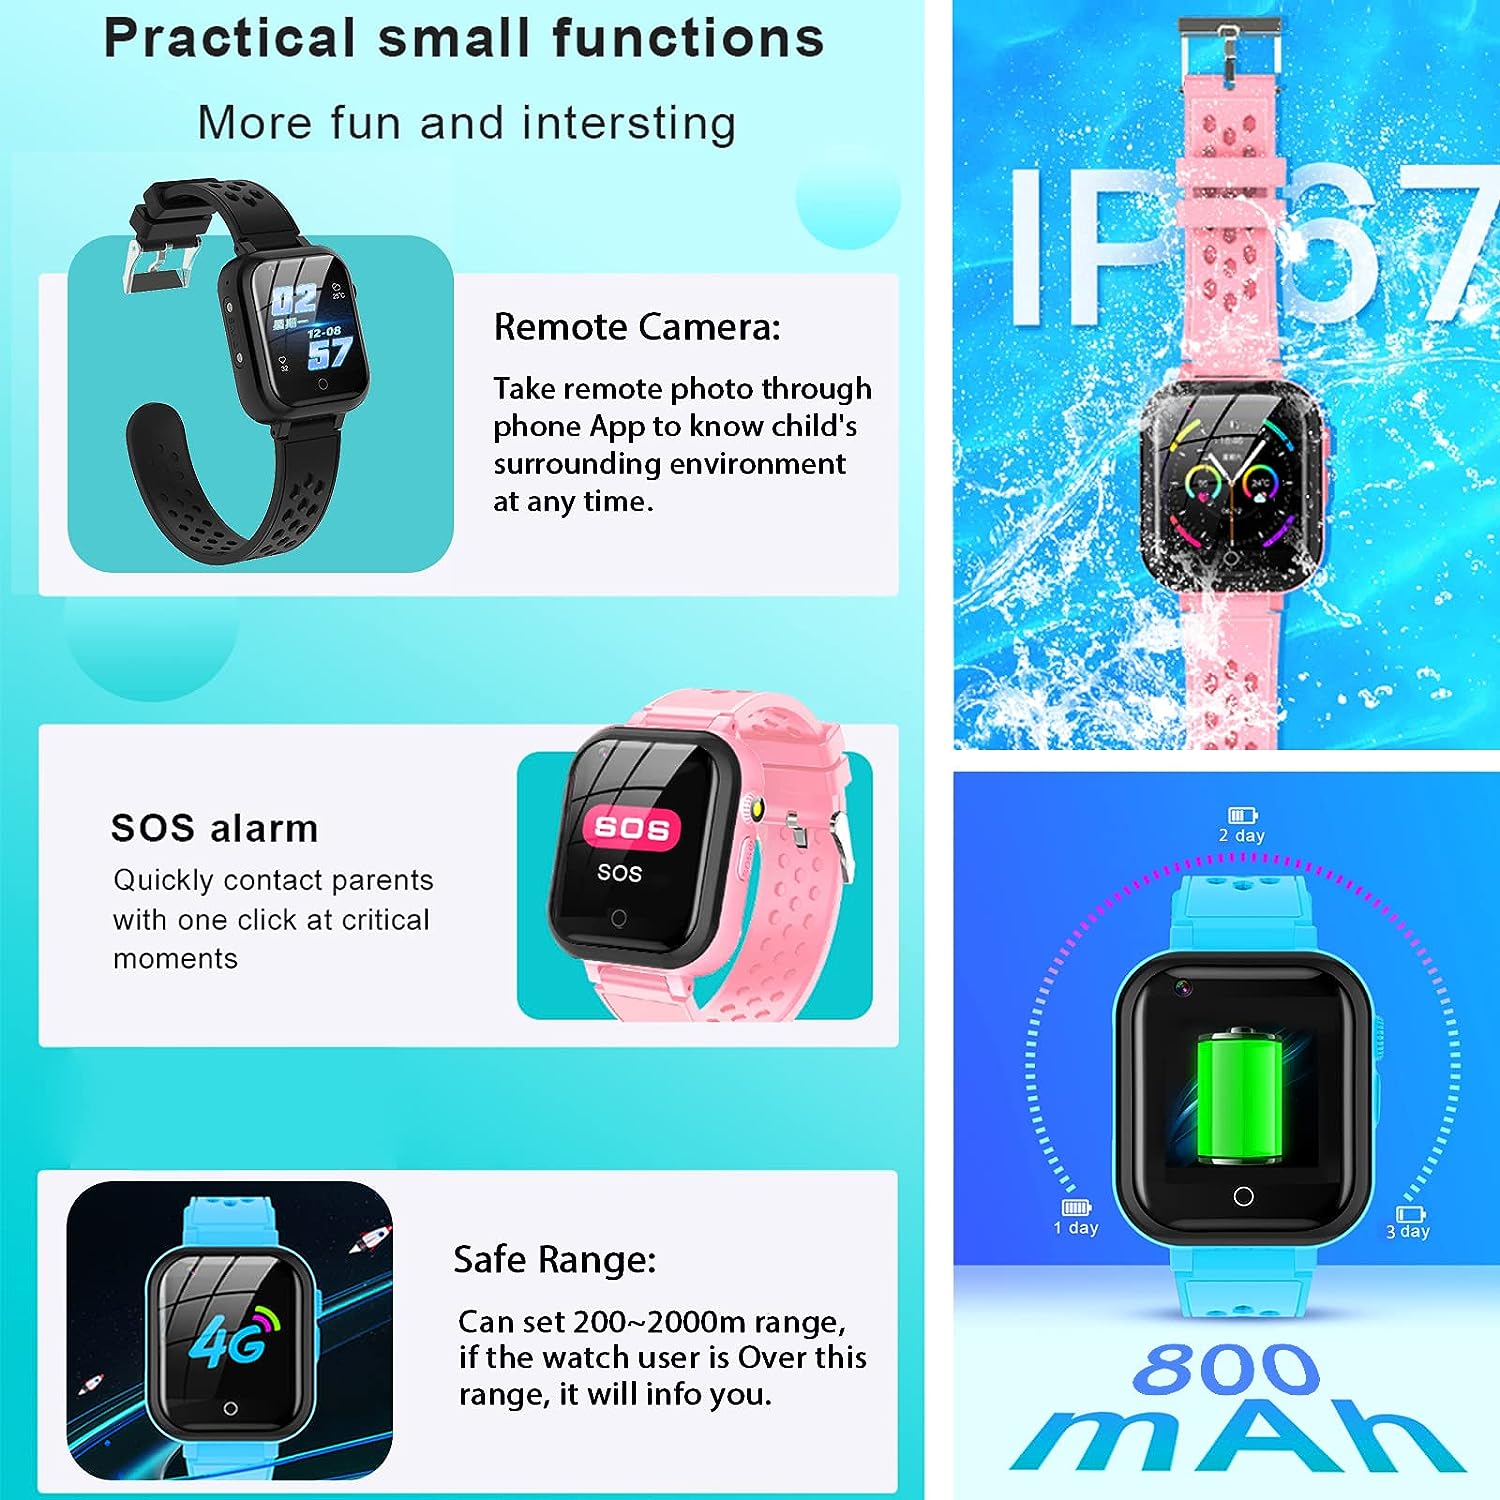 DDIOYIUR Smart Watch for Kids, 4G Kids Phone Smartwatch with GPS Tracker, WiFi, SMS, Call,Voice Video Chat,Bluetooth,Audio Recording,Alarm,Pedometer, Wrist Watch for 4-16 Boys Girls Birthday Gifts